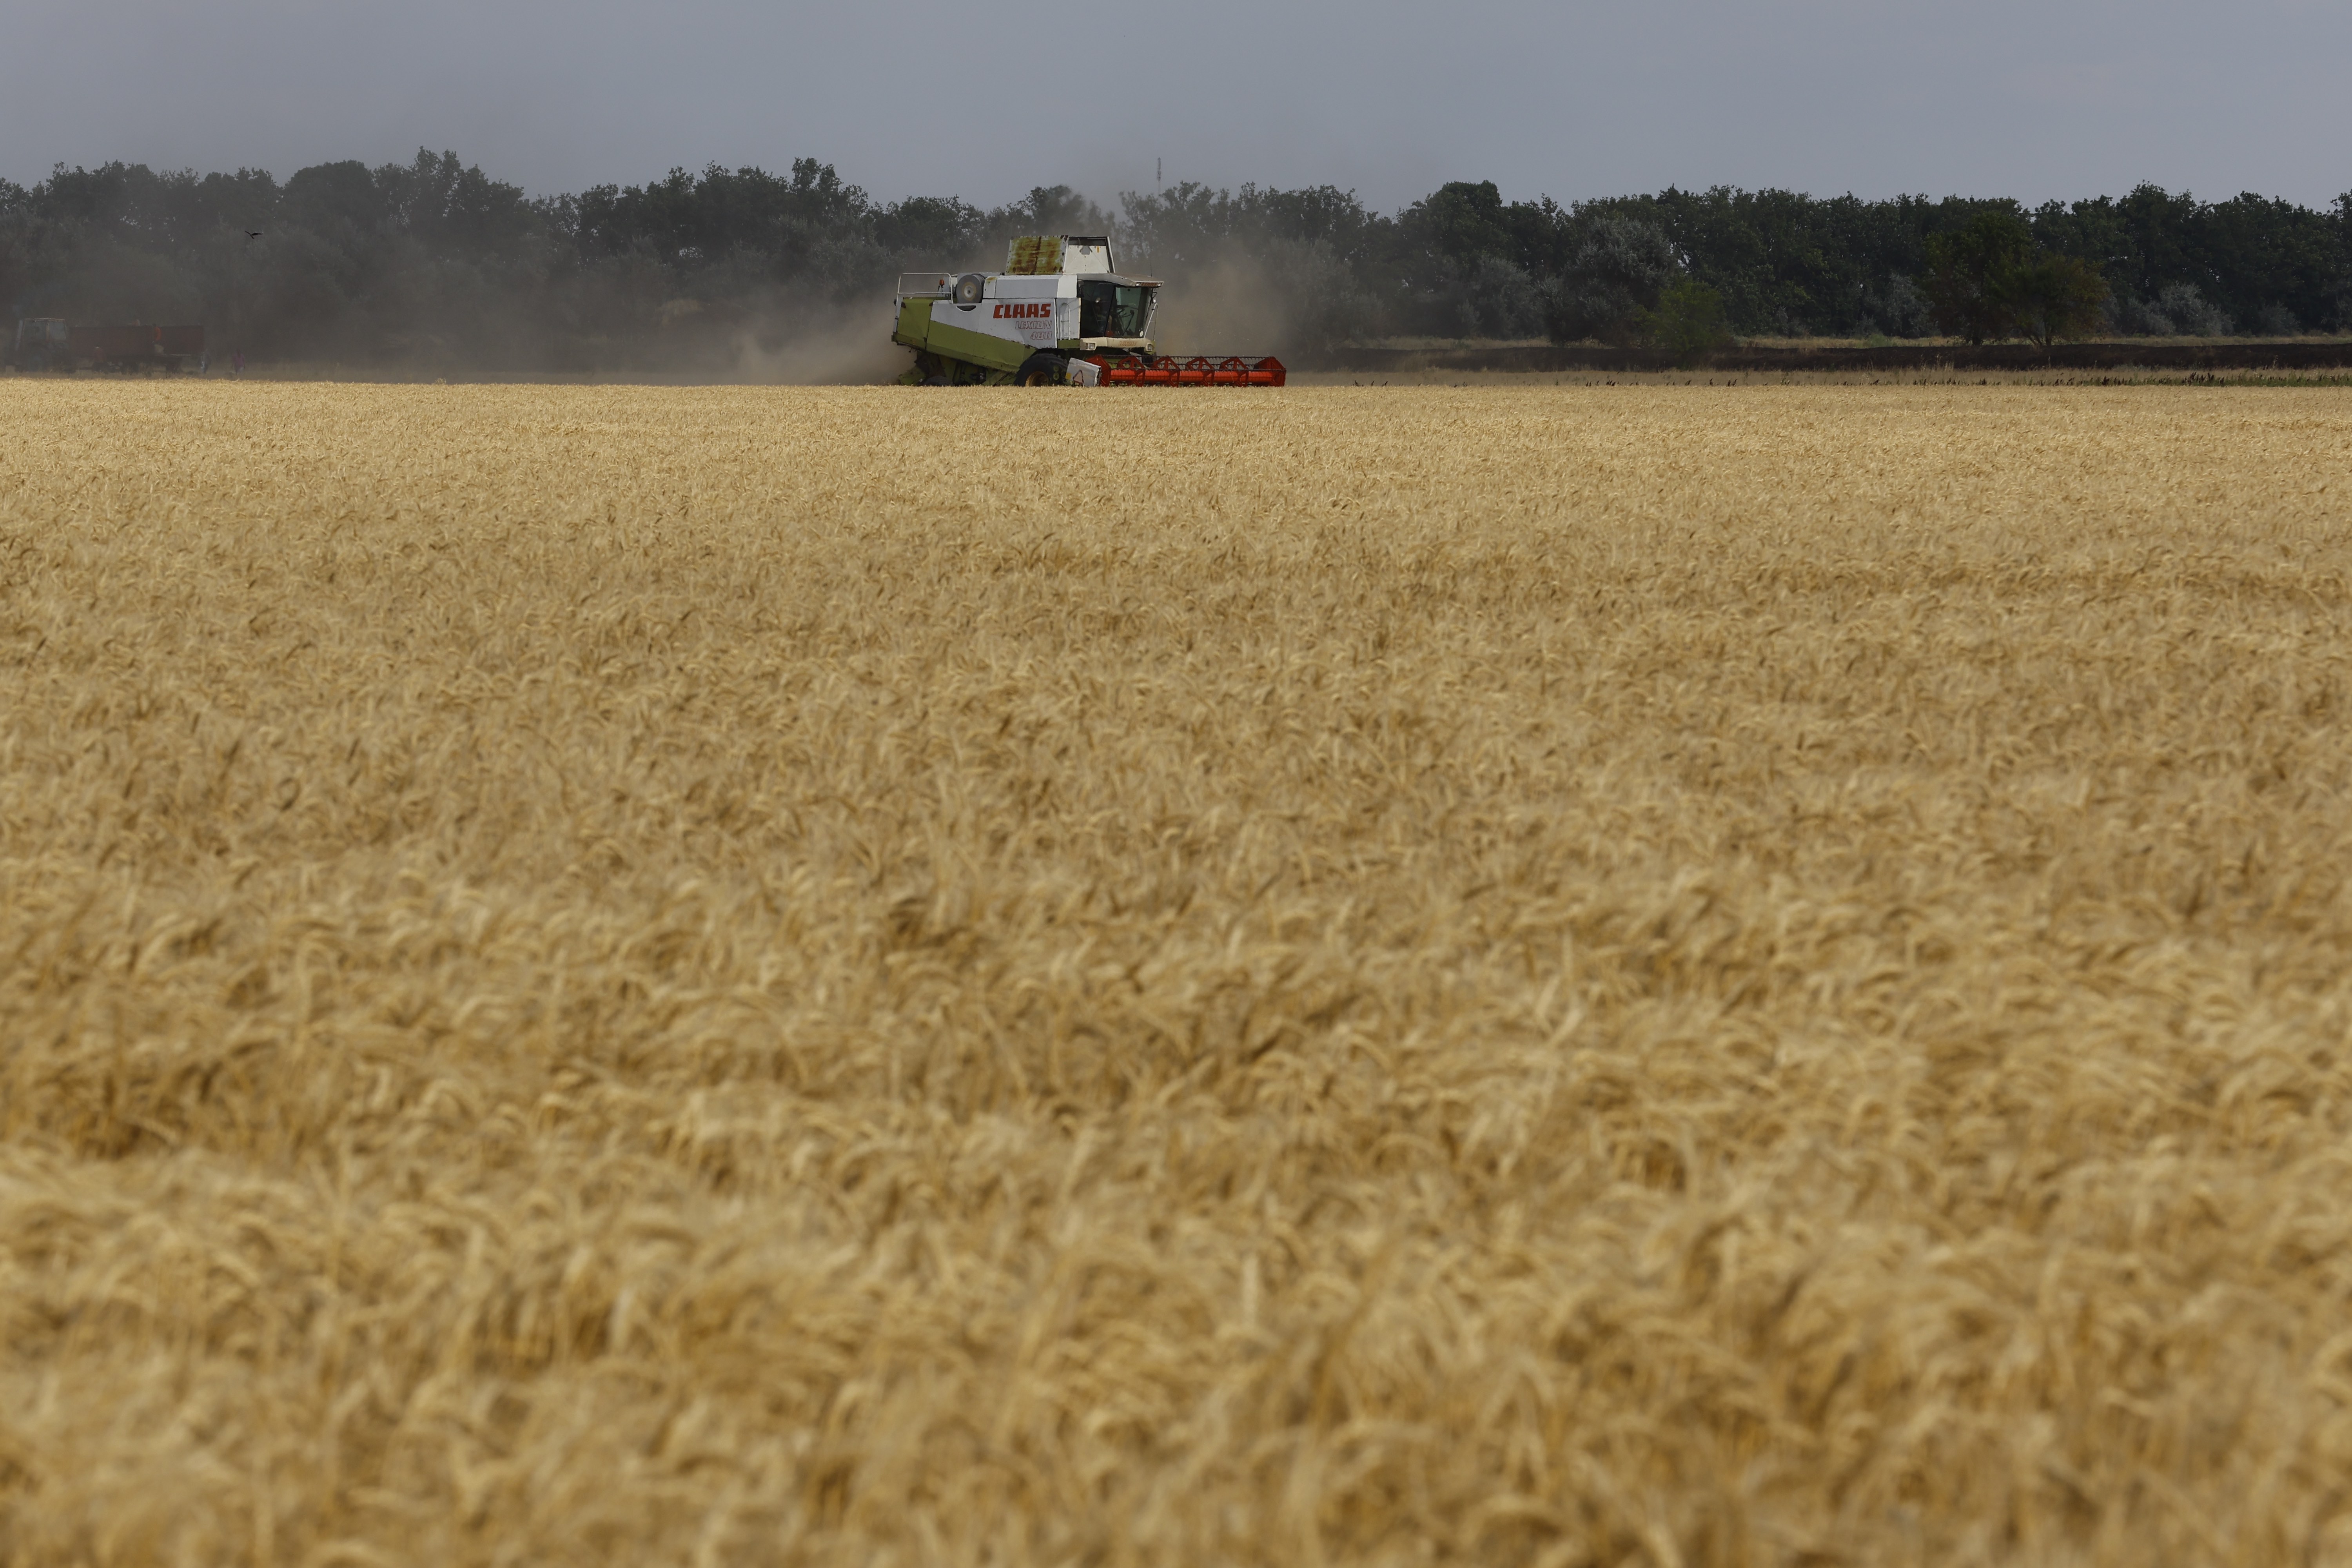 A harvester operates in a field in Kherson region on July 26, 2022.